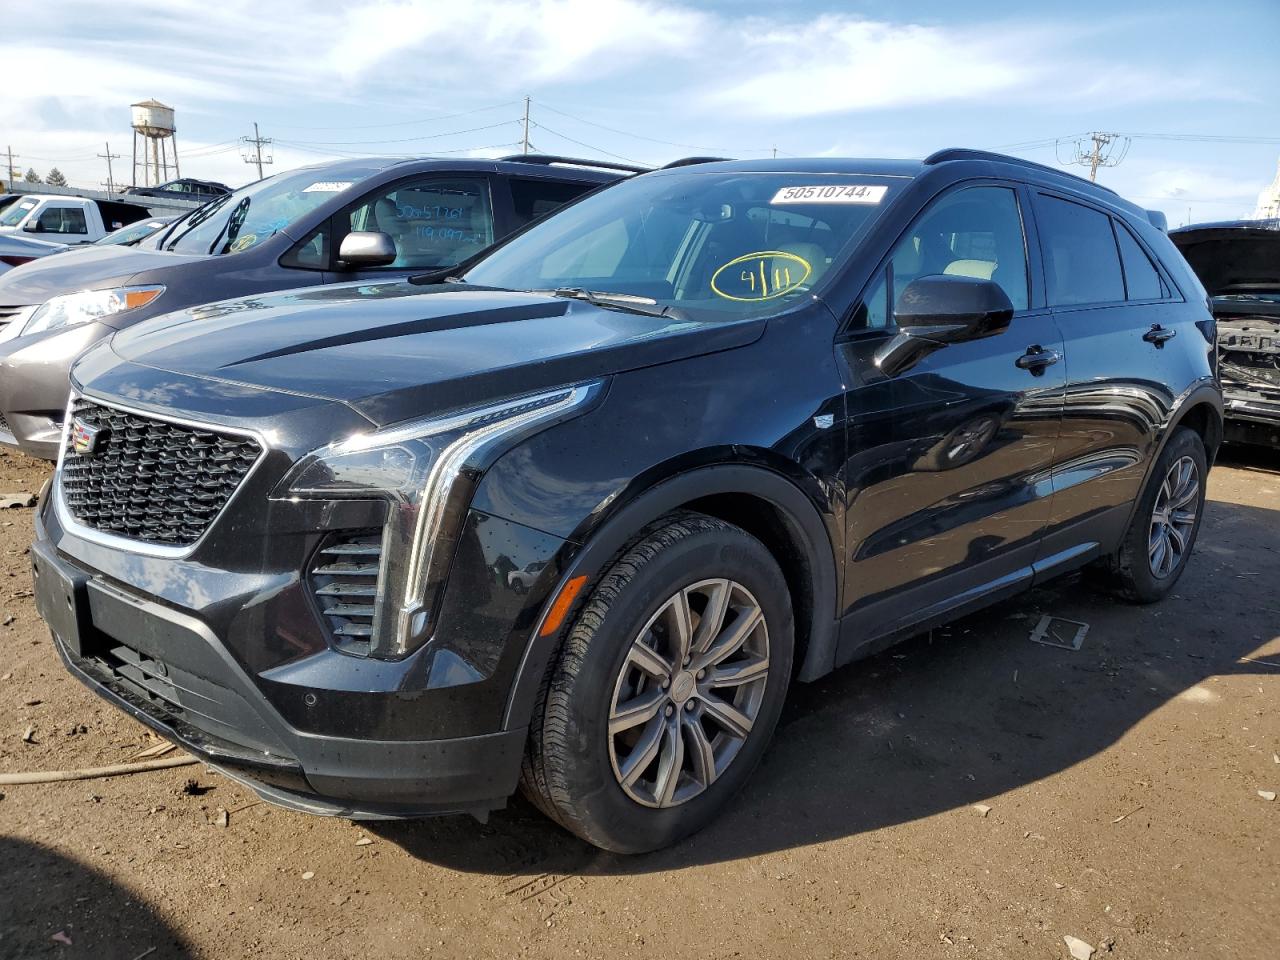 vin: 1GYFZFR45KF229308 1GYFZFR45KF229308 2019 cadillac xt4 2000 for Sale in 60411 5546, Il - Chicago South, Chicago Heights, Illinois, USA